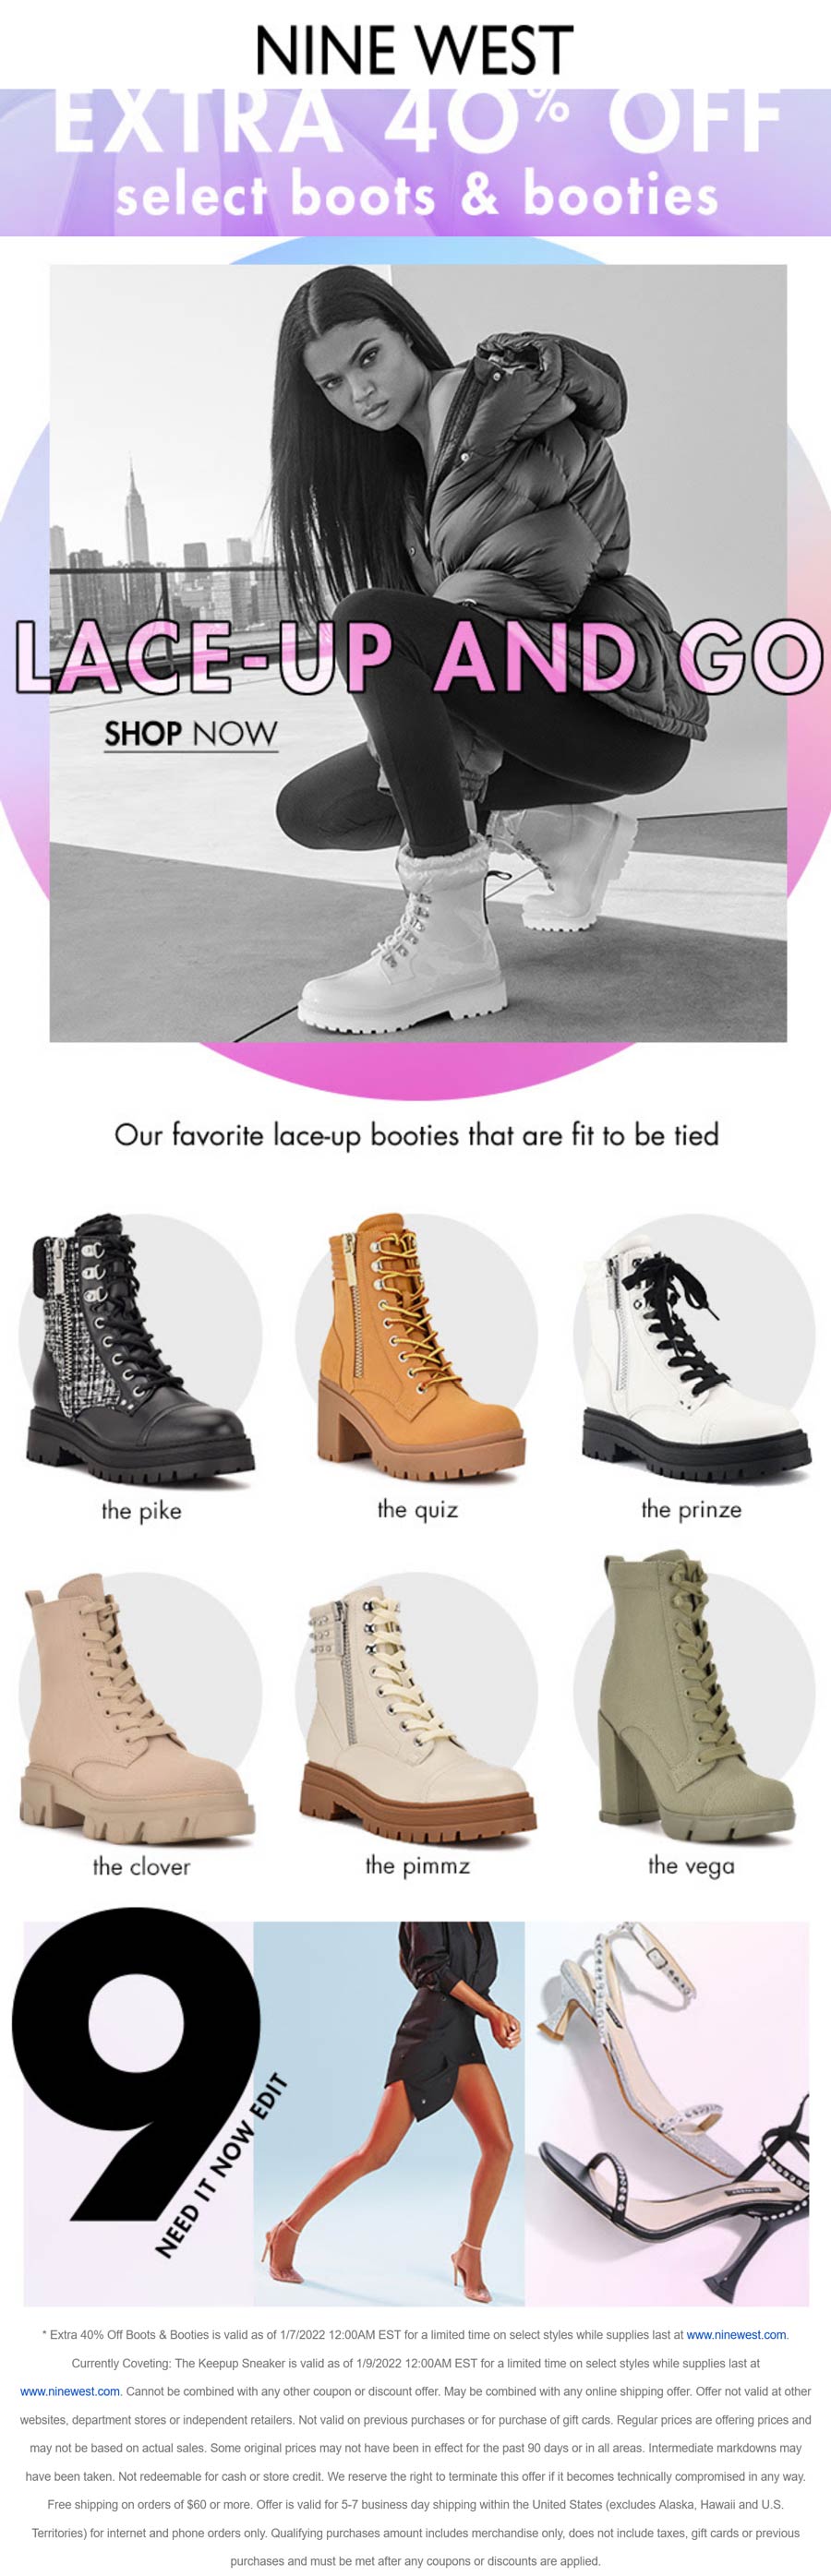 Nine West stores Coupon  Extra 40% off boots & booties online today at Nine West #ninewest 